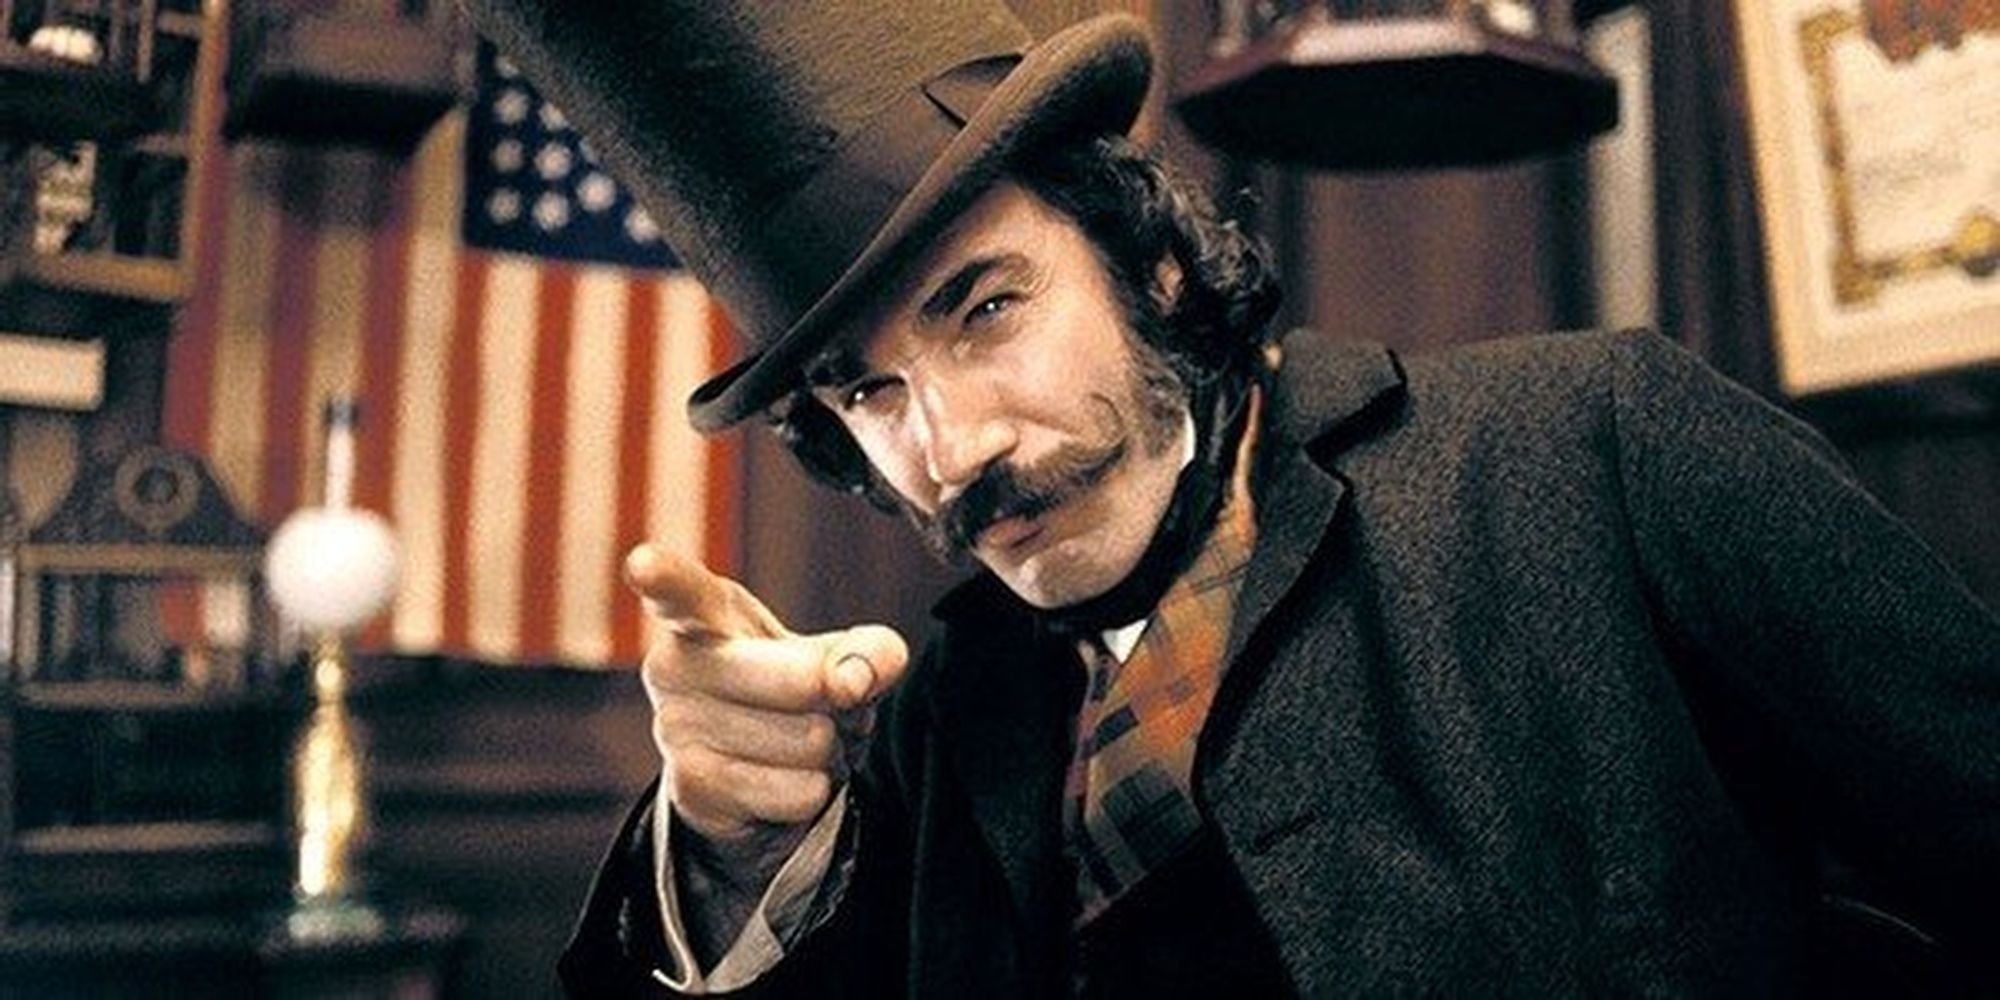 Daniel Day-Lewis as The Butcher in Gangs of New York